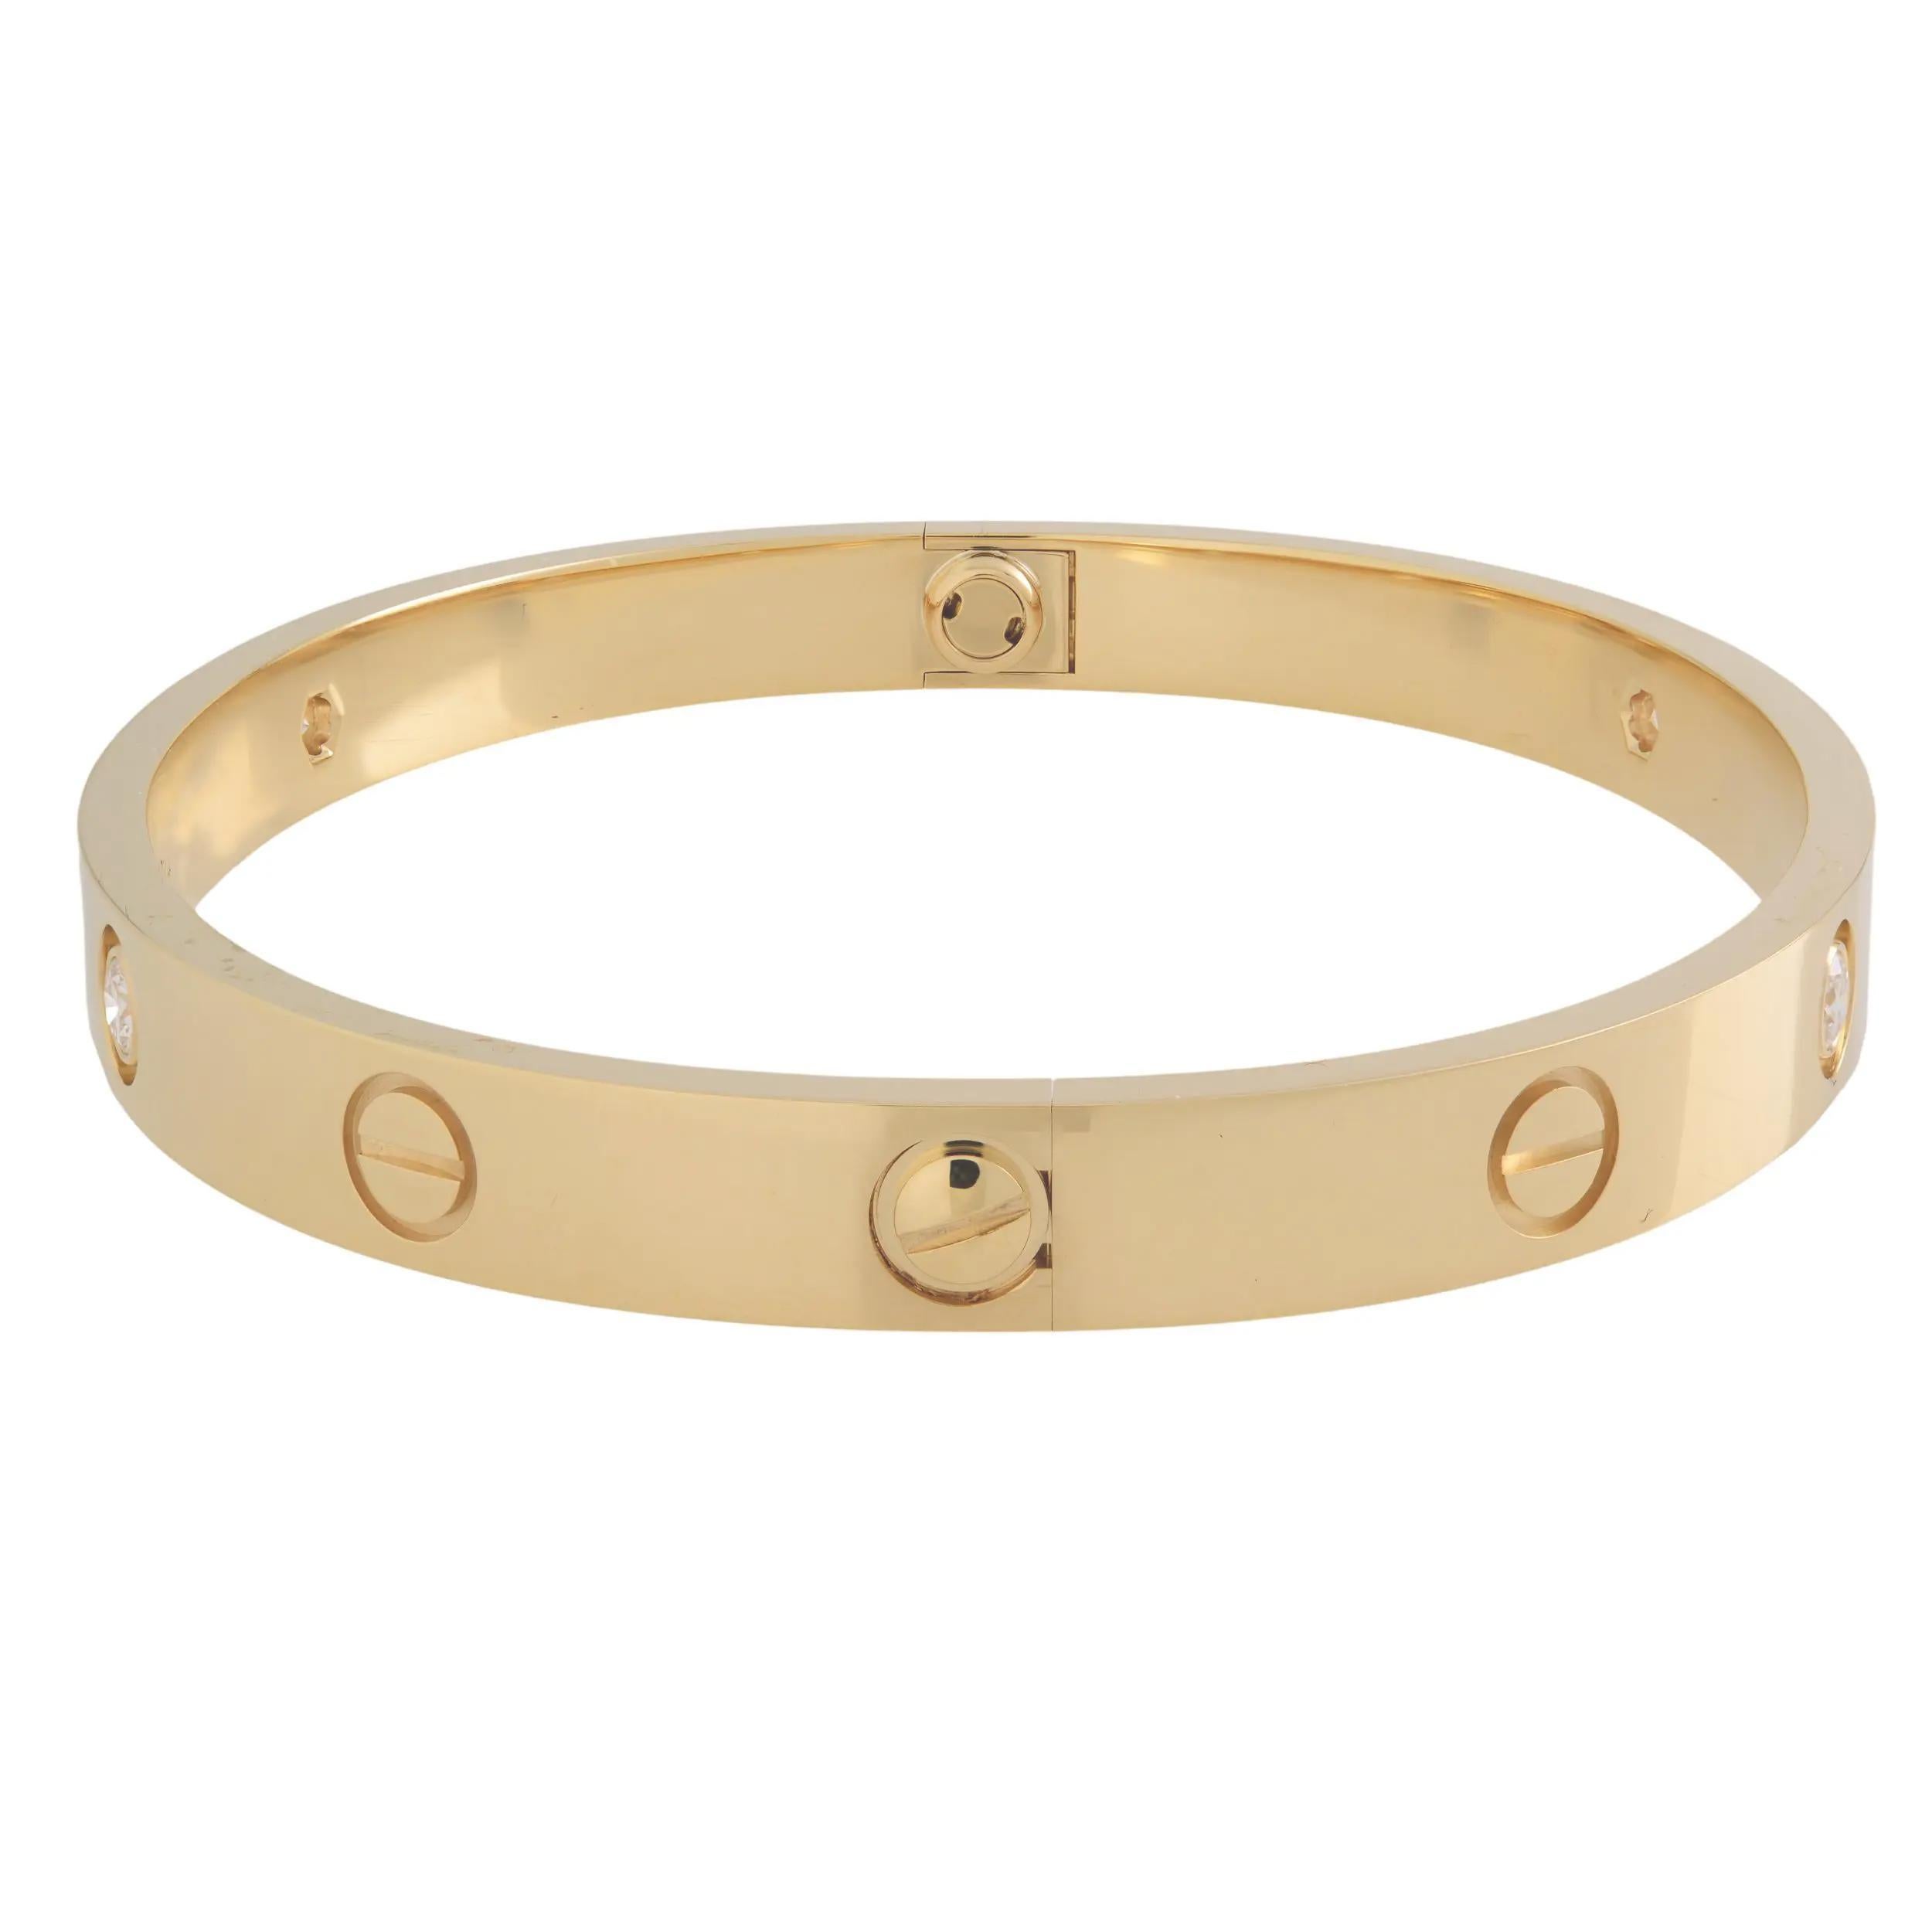 Cartier LOVE bracelet crafted in 18K yellow gold, set with 4 round brilliant cut diamonds weighing 0.42 carats. A close fitting, oval bracelet composed of two rigid arcs which are worn on the wrist and removed using a specific screwdriver. New style